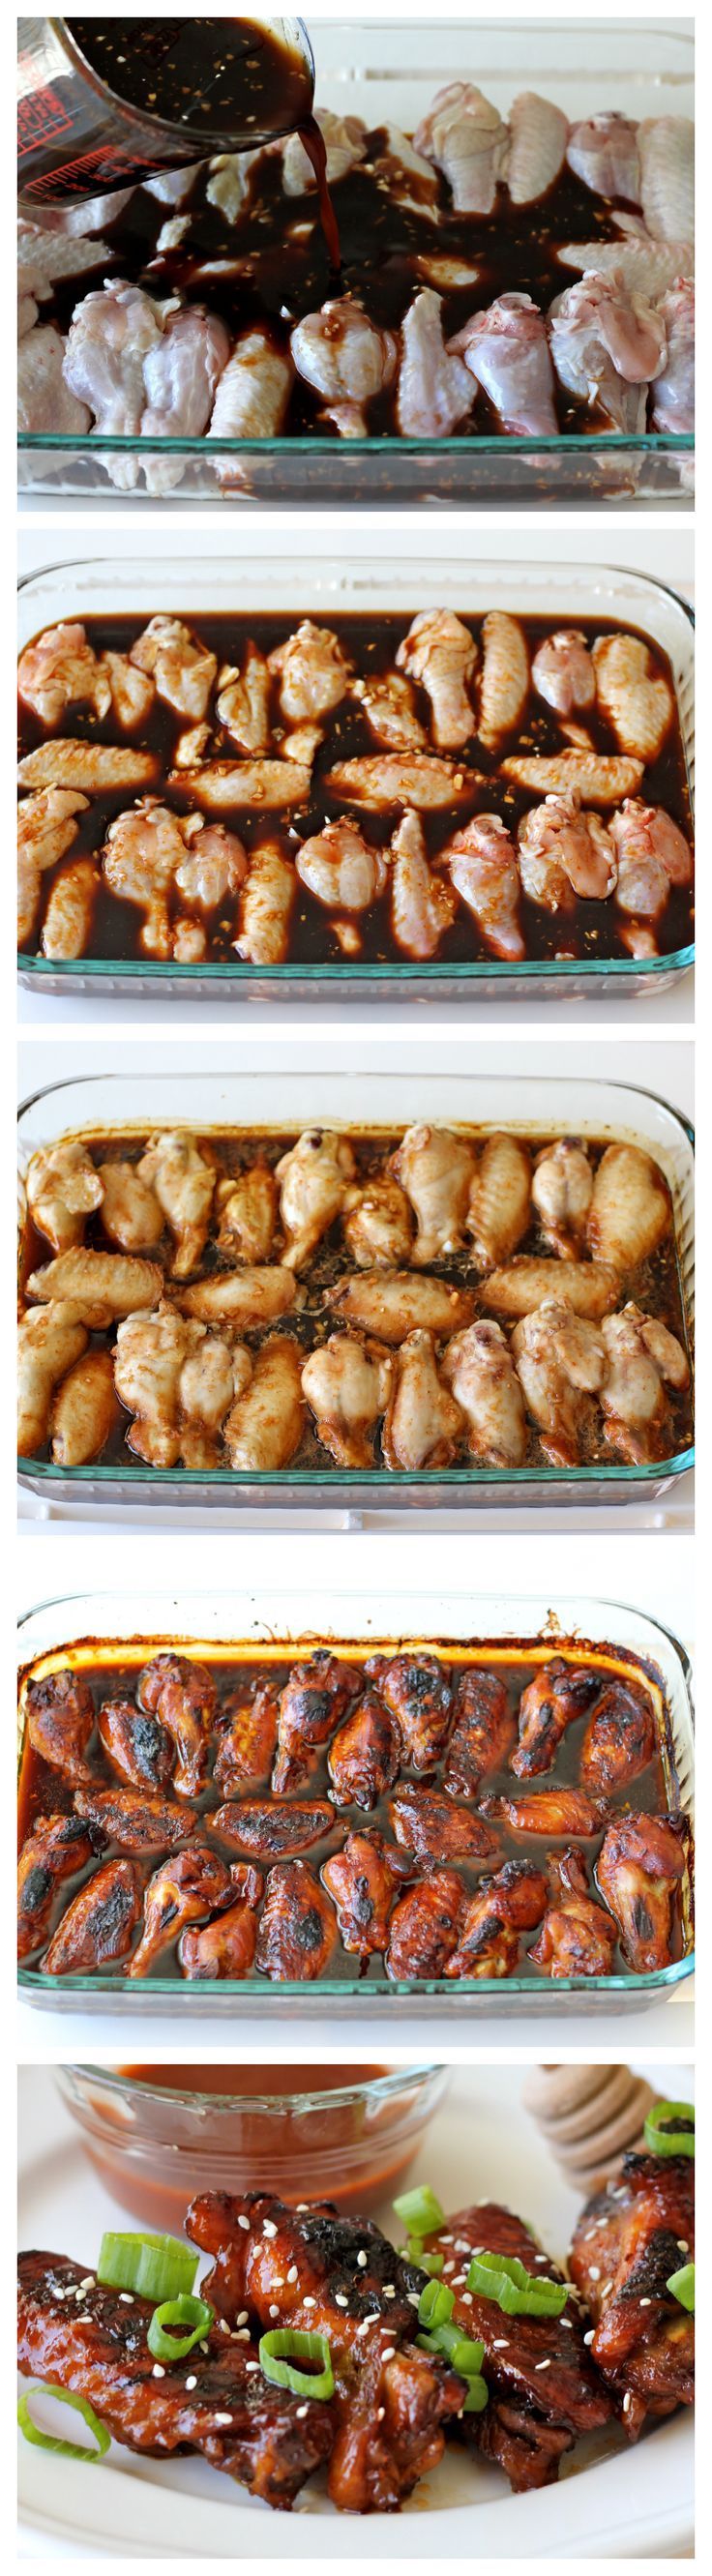 BIG Game Day Recipe- Honey Teriyaki Hot Wings – Sweet and spicy wings baked to crisp perfection. Doesnt get easier than